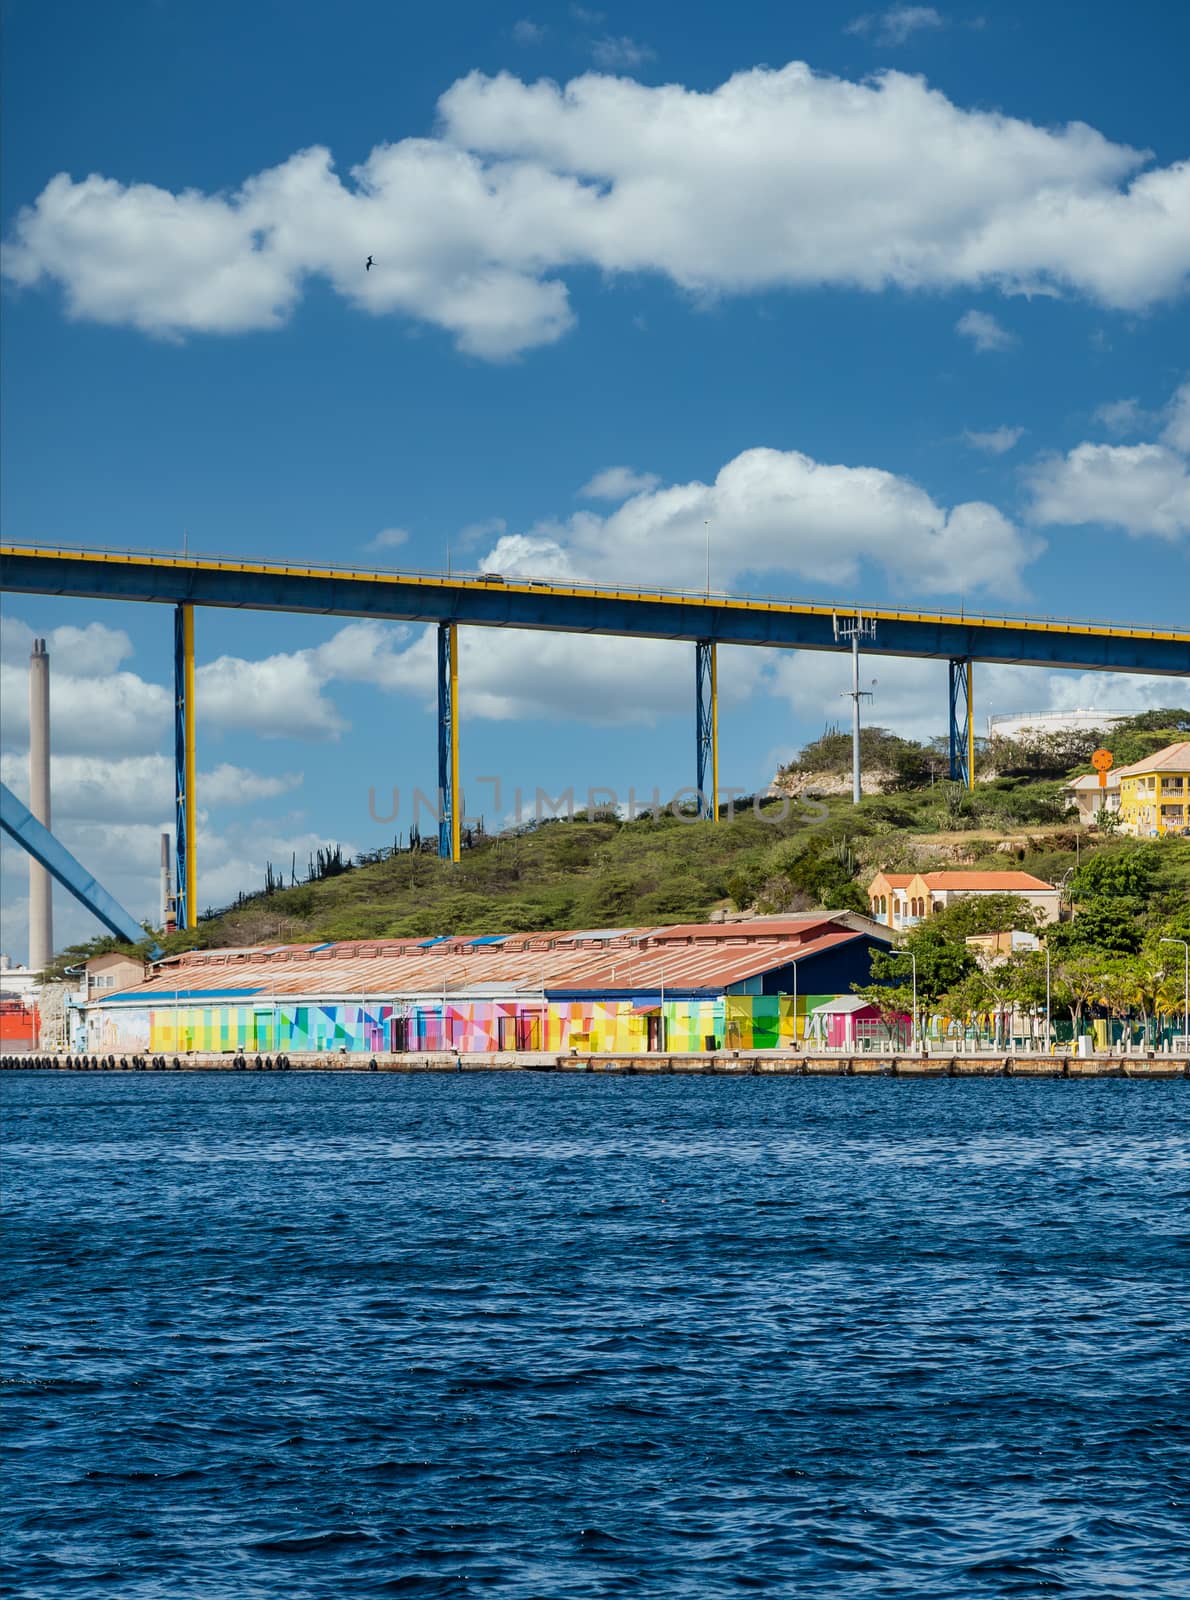 Colorful buildings in Curacao under the blue sky bridge